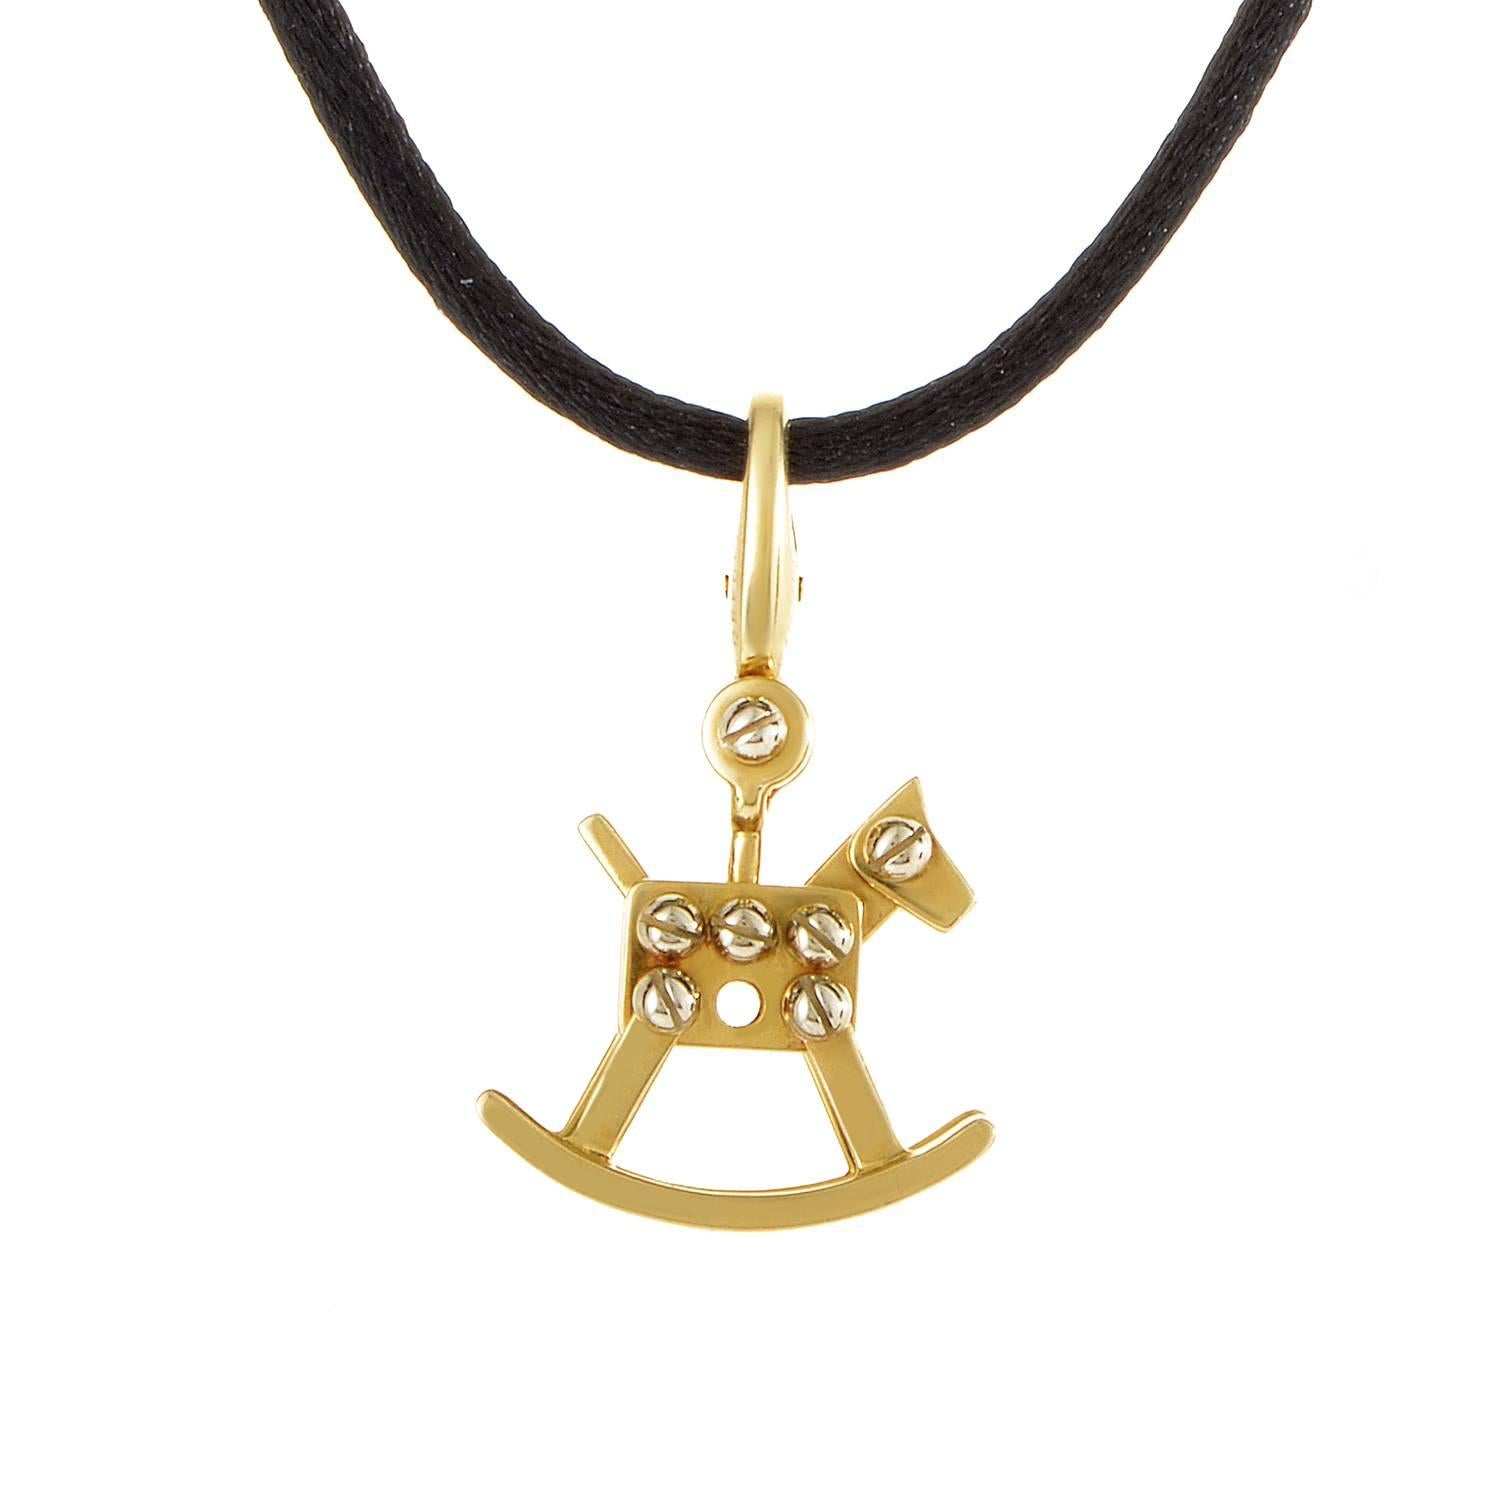 This adorable Cartier pendant necklace is the perfect keepsake gift. The necklace is a black silken cord from which hangs a petite 18K yellow gold rocking horse. Lastly, the horse is studded with small white gold bolts.
Approximate Dimensions: Drop